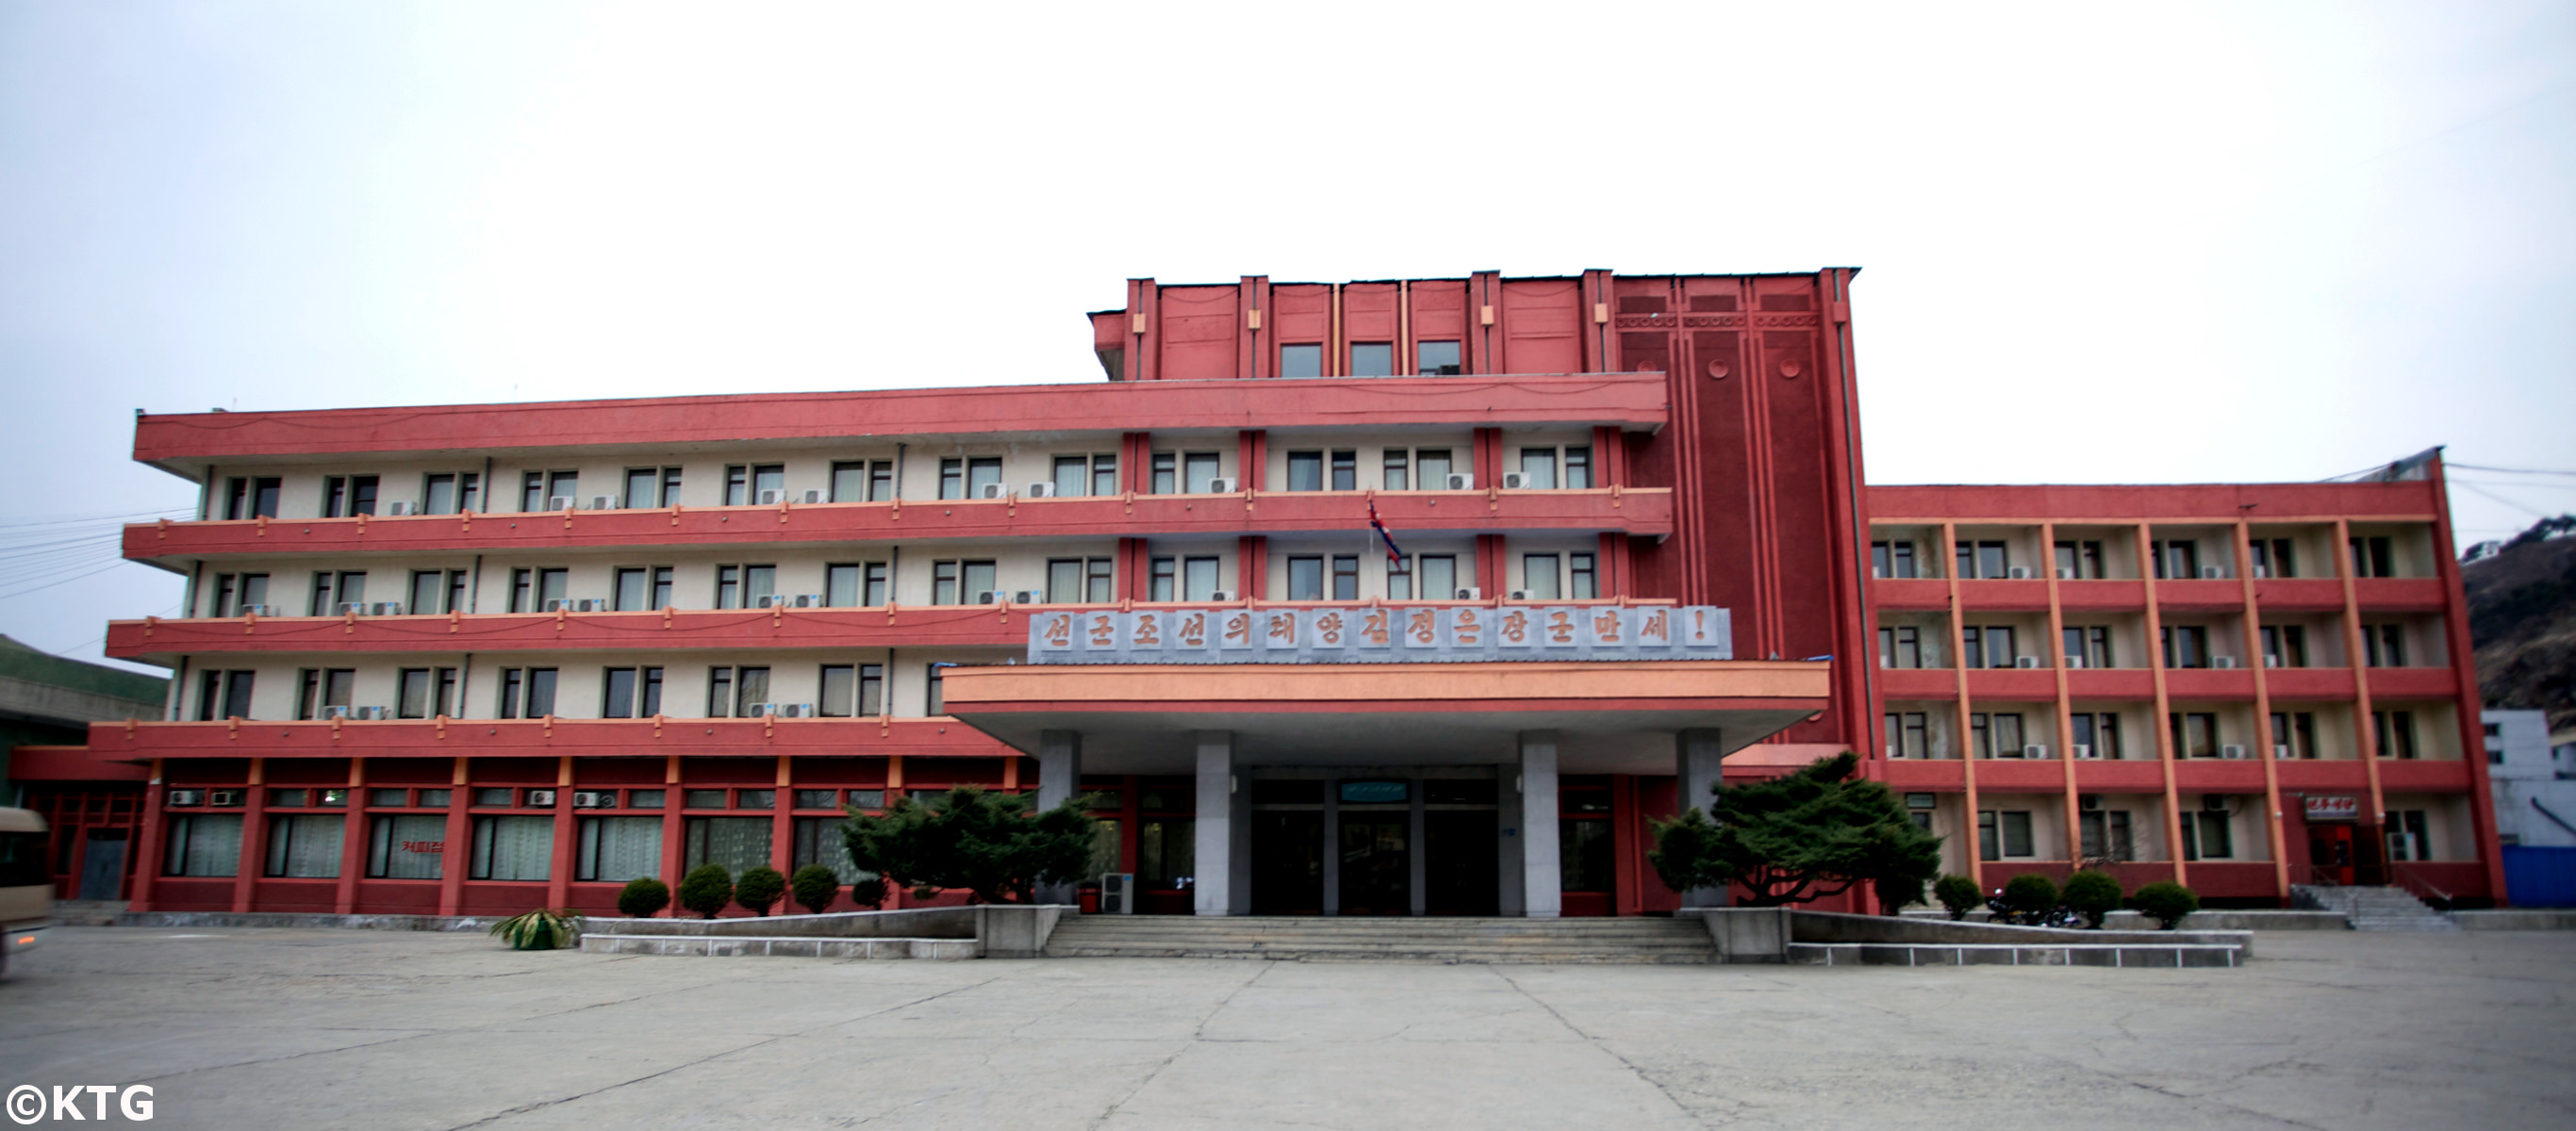 The Jangsusan Hotel in Pyongsong city, North Korea, DPRK. This is the only hotel in the city where foreigners can stay. Picture taken by KTG Tours.